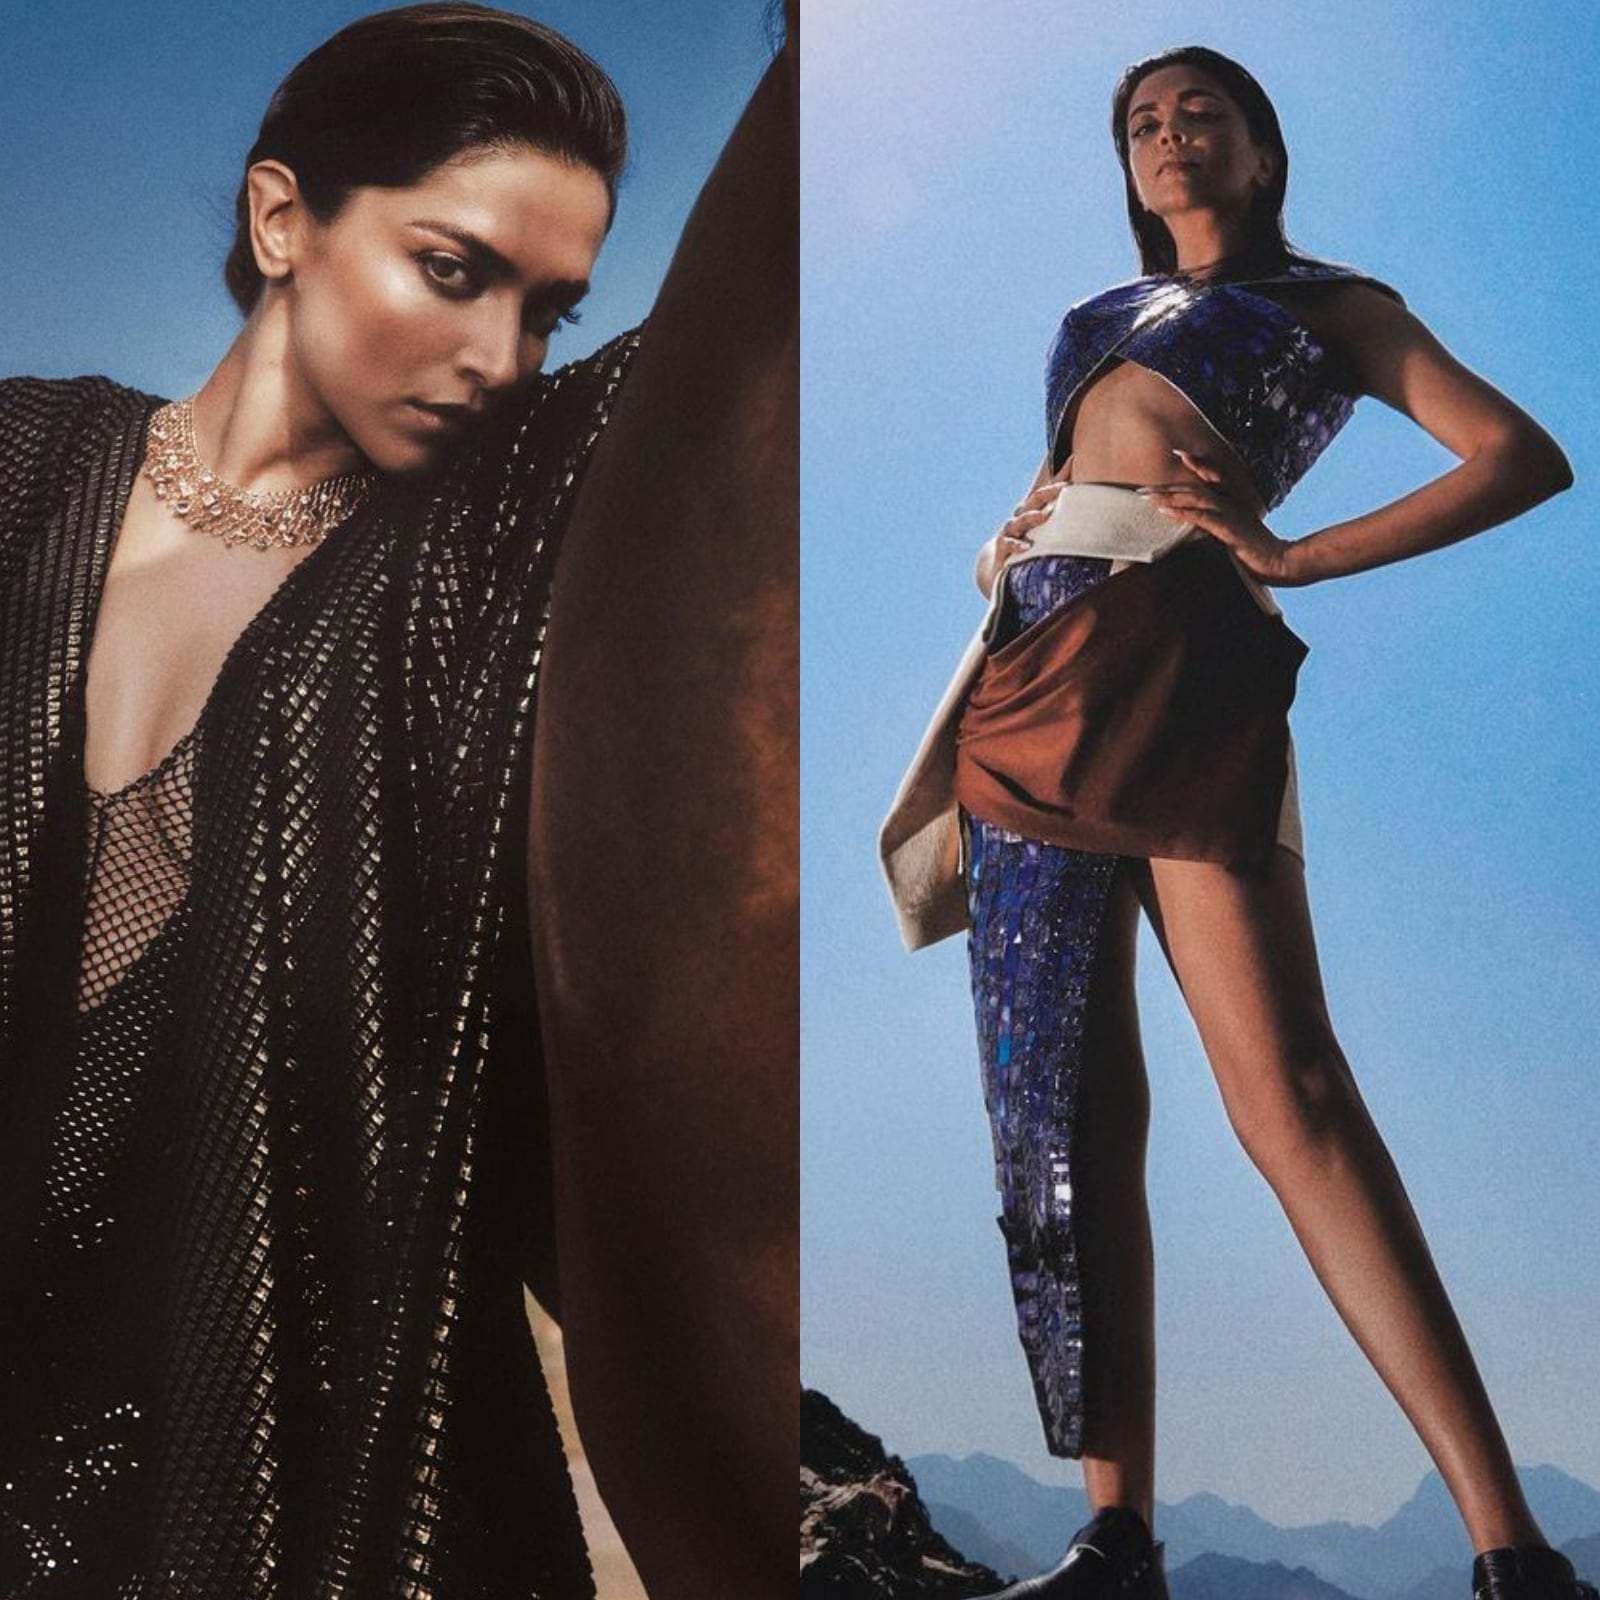 Deepika Padukone shares 8 reasons behind her happiness with latest Vogue  shoot